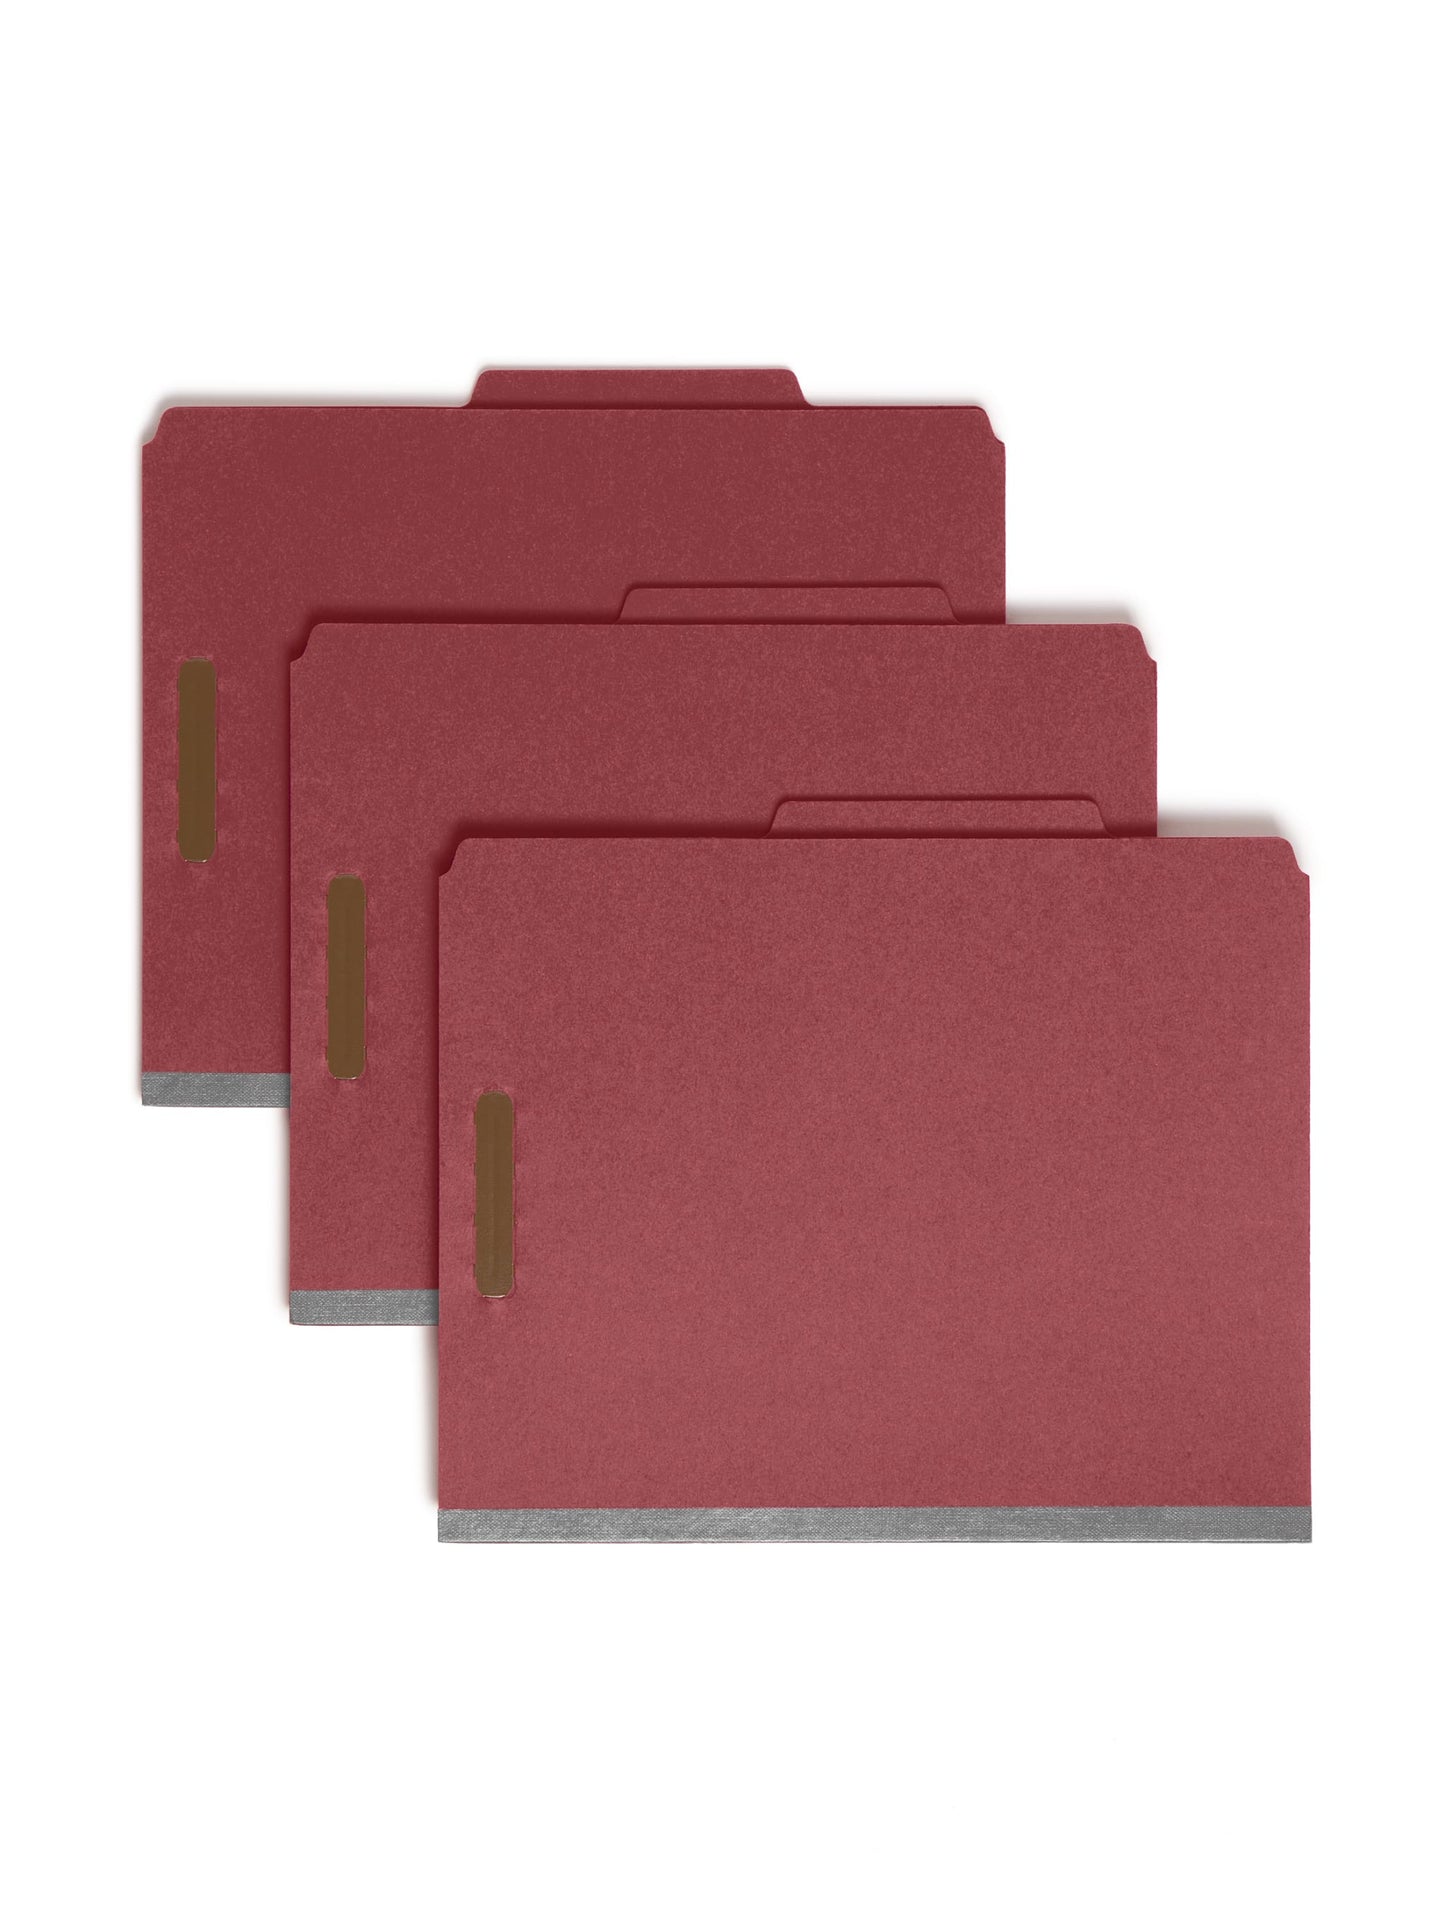 Pressboard Classification File Folders, 2 Dividers, 2 inch Expansion, Bright Red Color, Letter Size, 